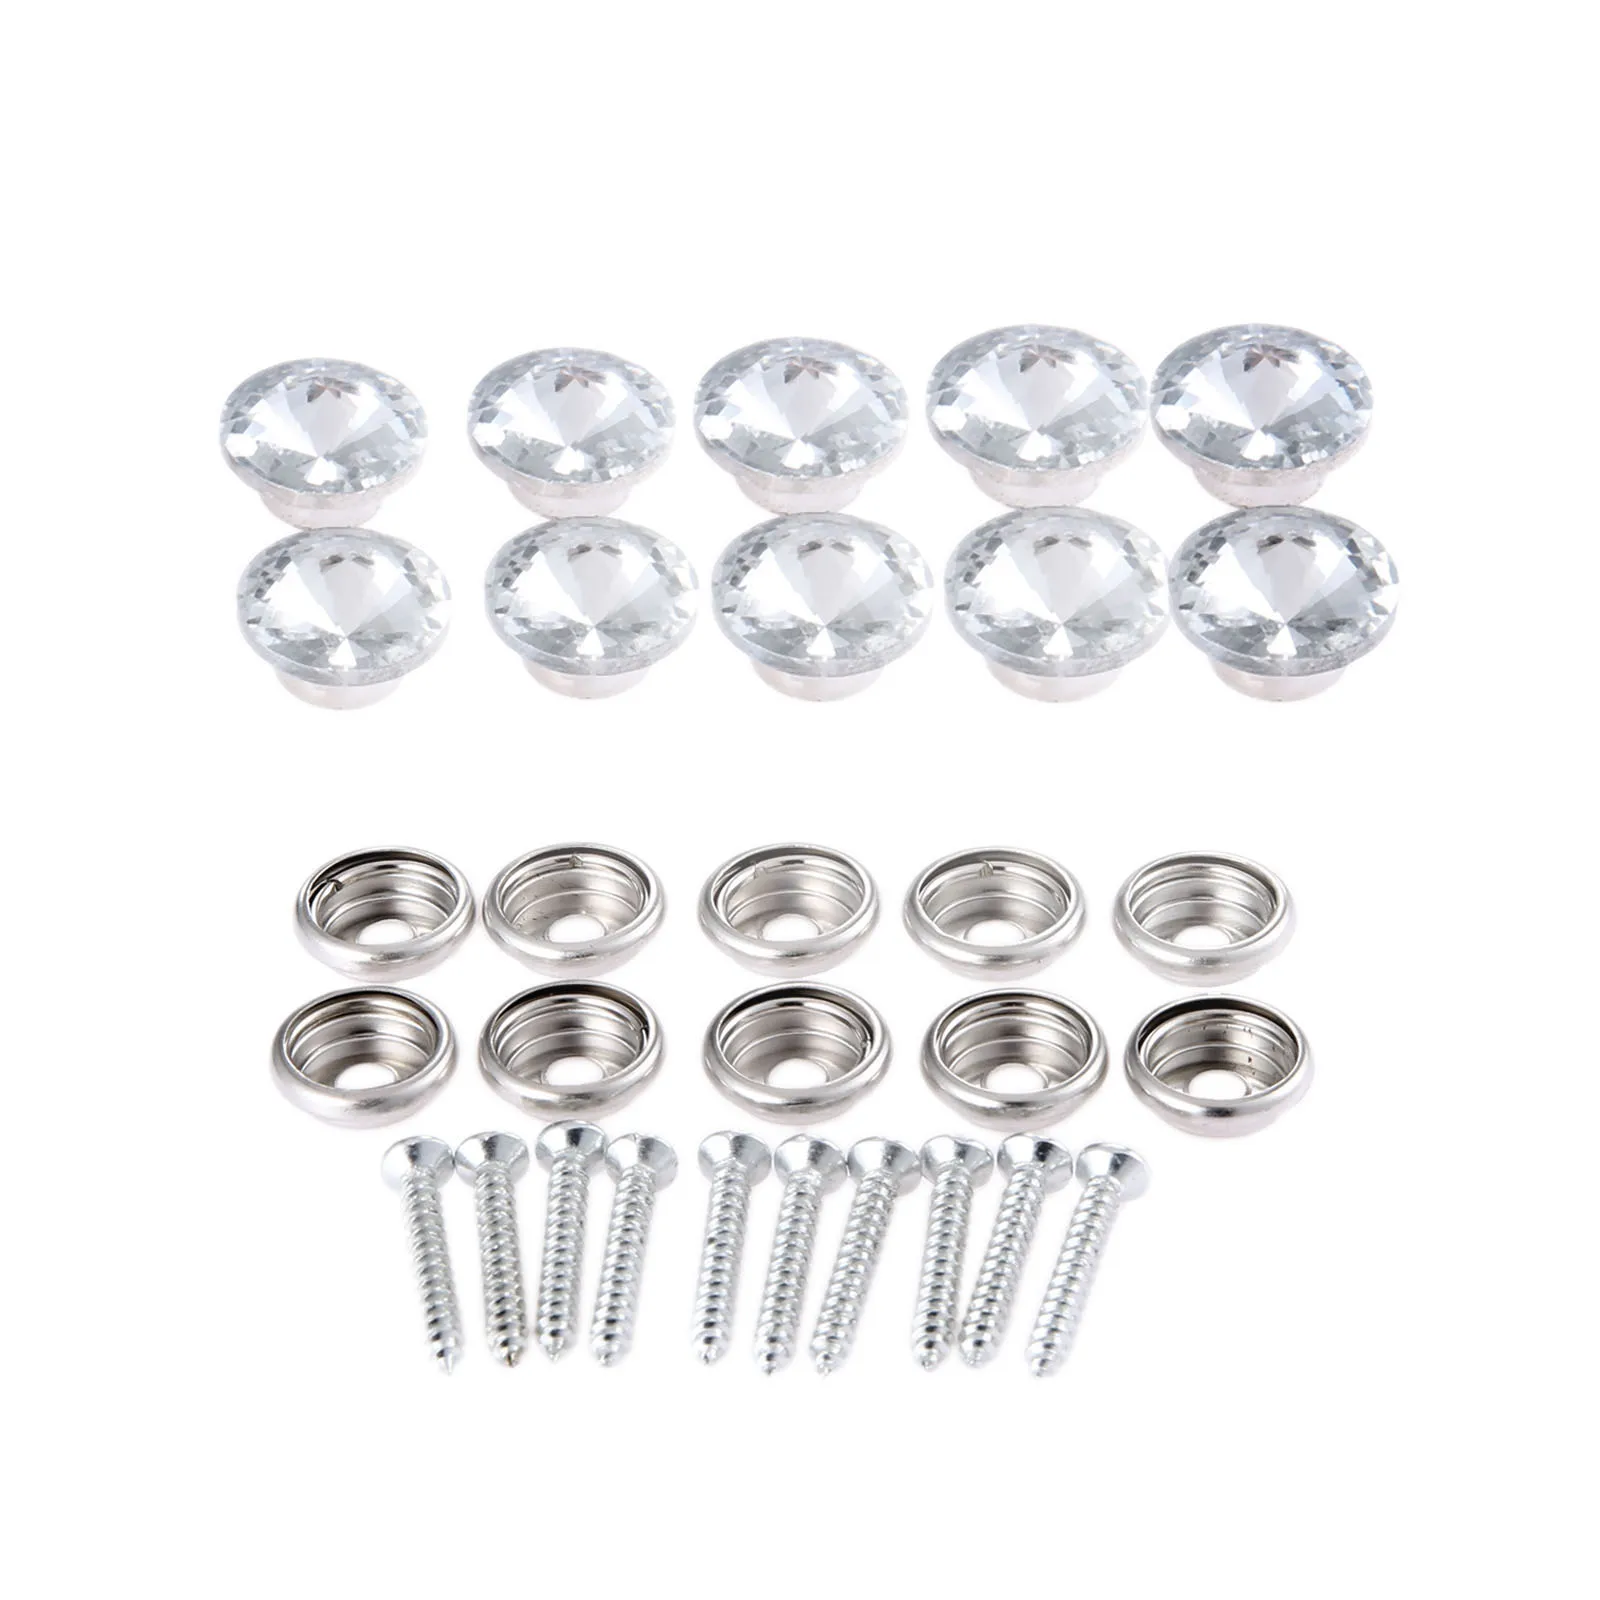 Upholstery Nails – Furniture Studs/Tacks/Pins 50 Count 16mm Chrome Diamond 